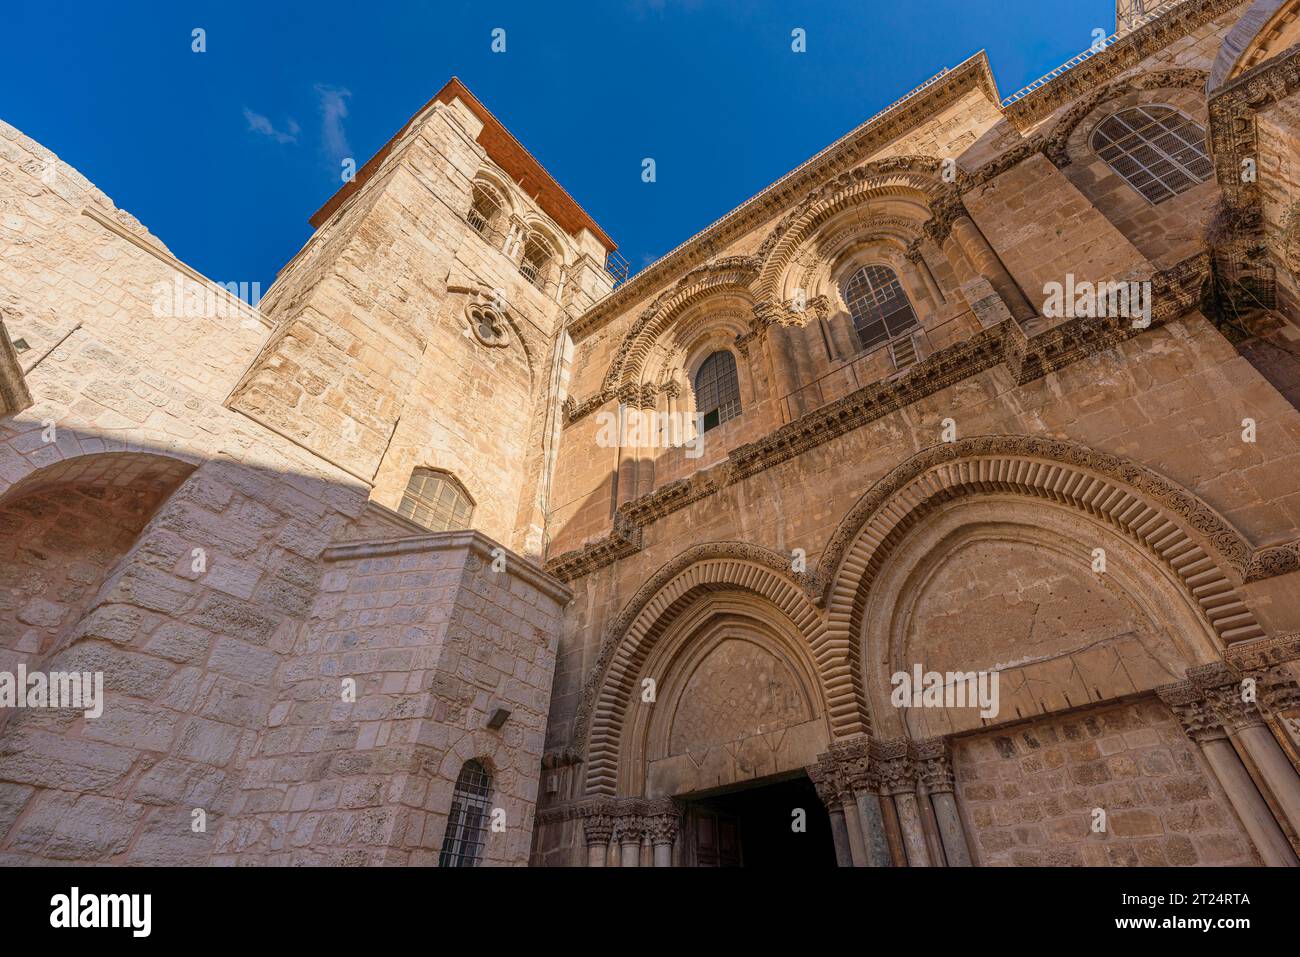 Entrance to the Church of the Holy Sepulchre in the Christian Quarter of the Old City of Jerusalem Stock Photo